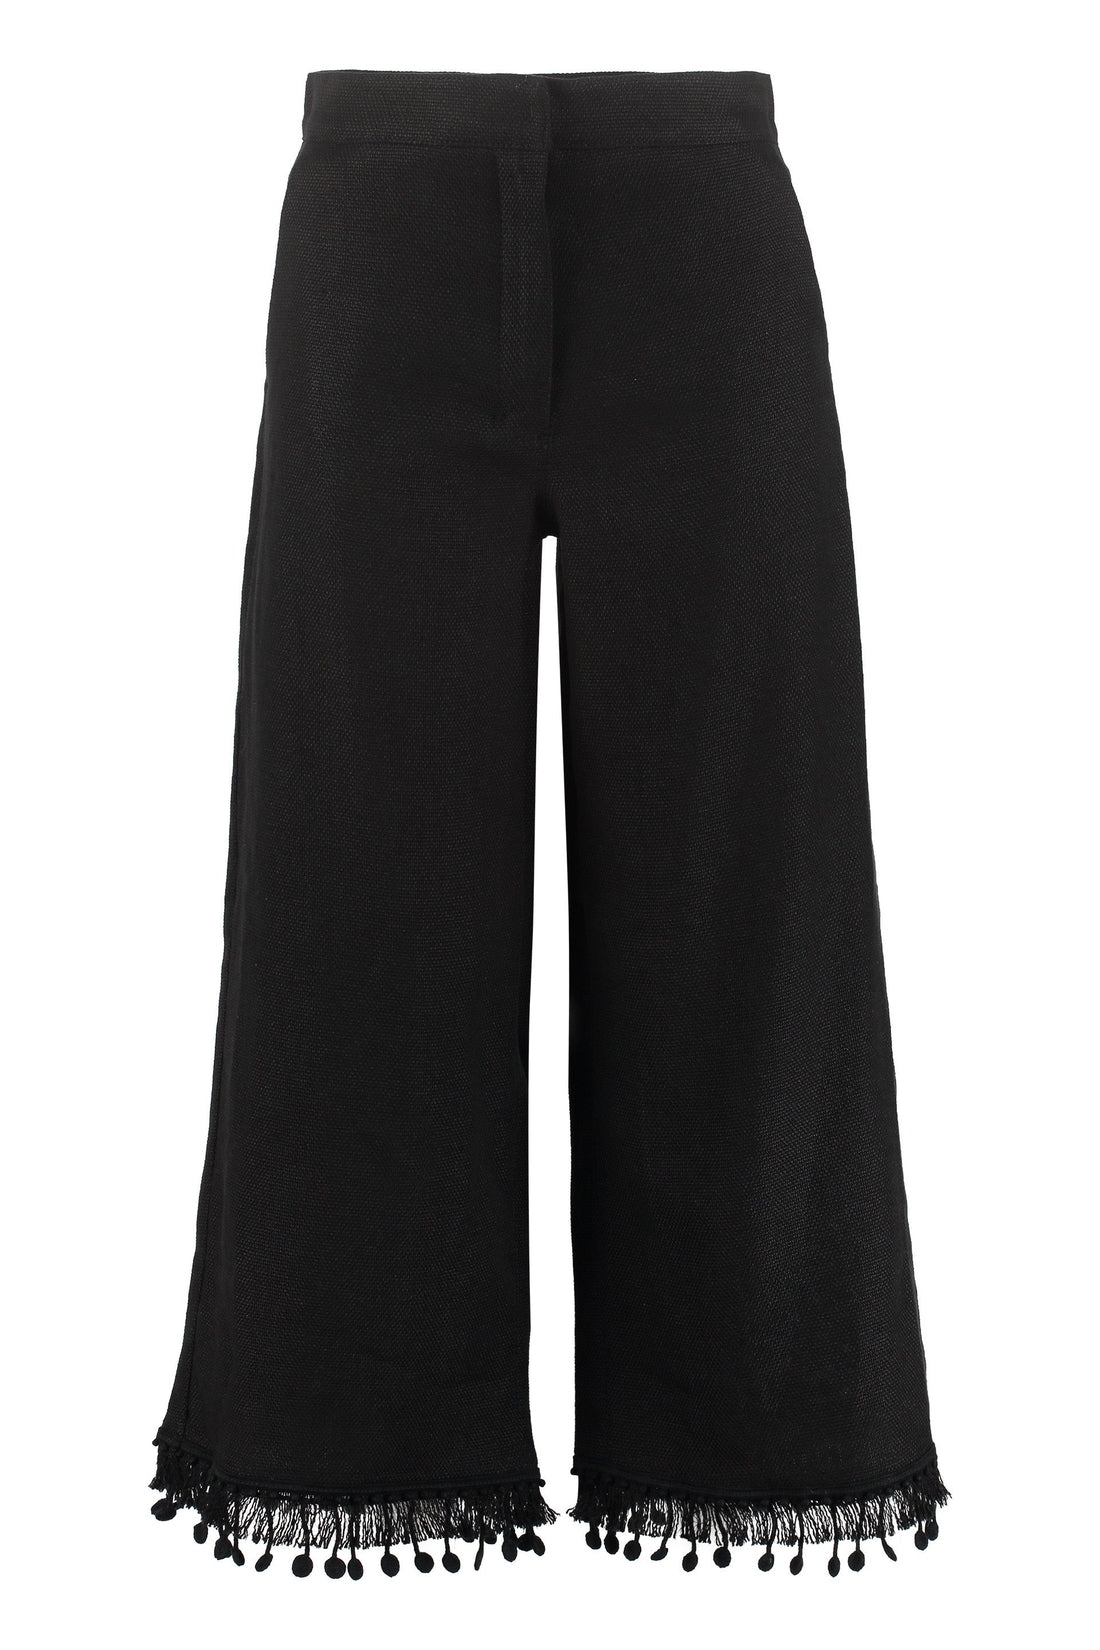 S MAX MARA-OUTLET-SALE-Fiaba linen and cotton trousers-ARCHIVIST